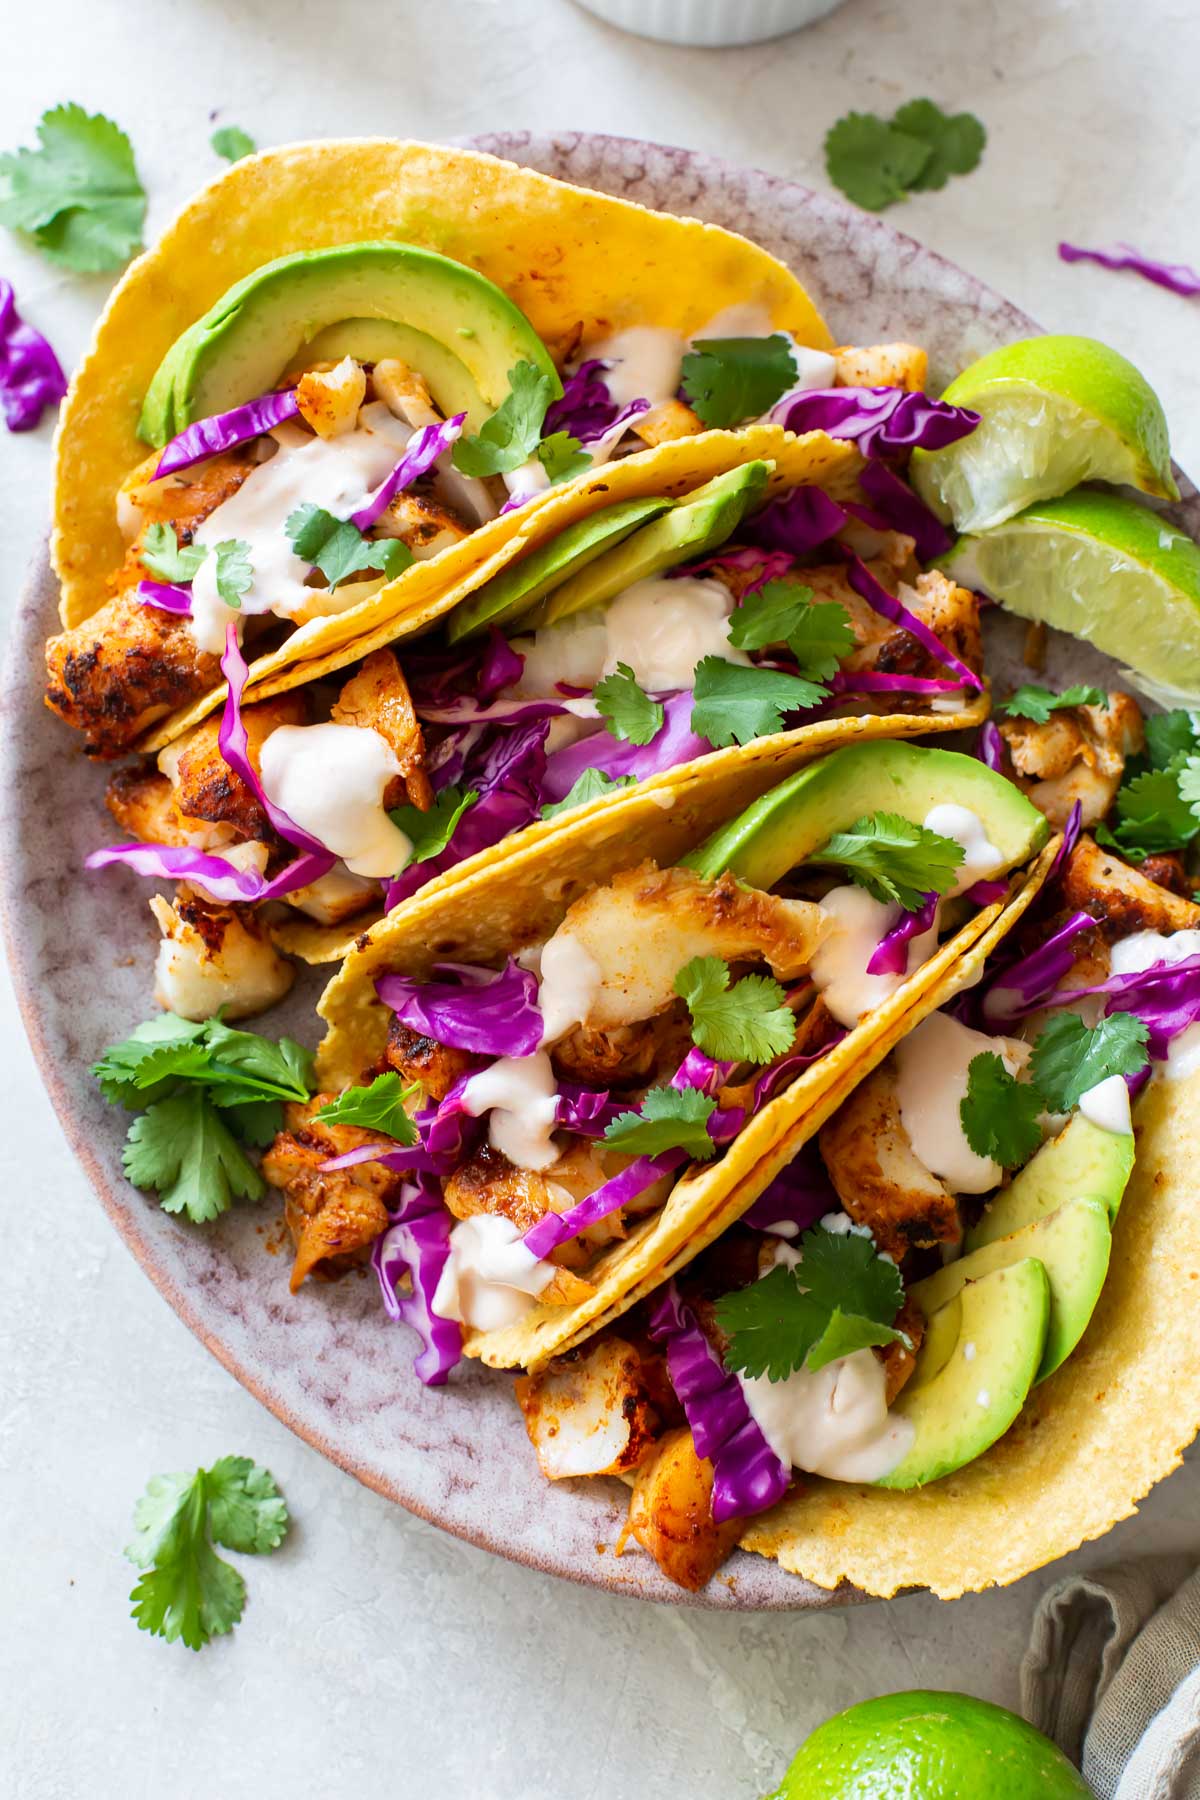 Easy Fish Tacos The BEST Fish Taco Recipe with Fish Taco Sauce!